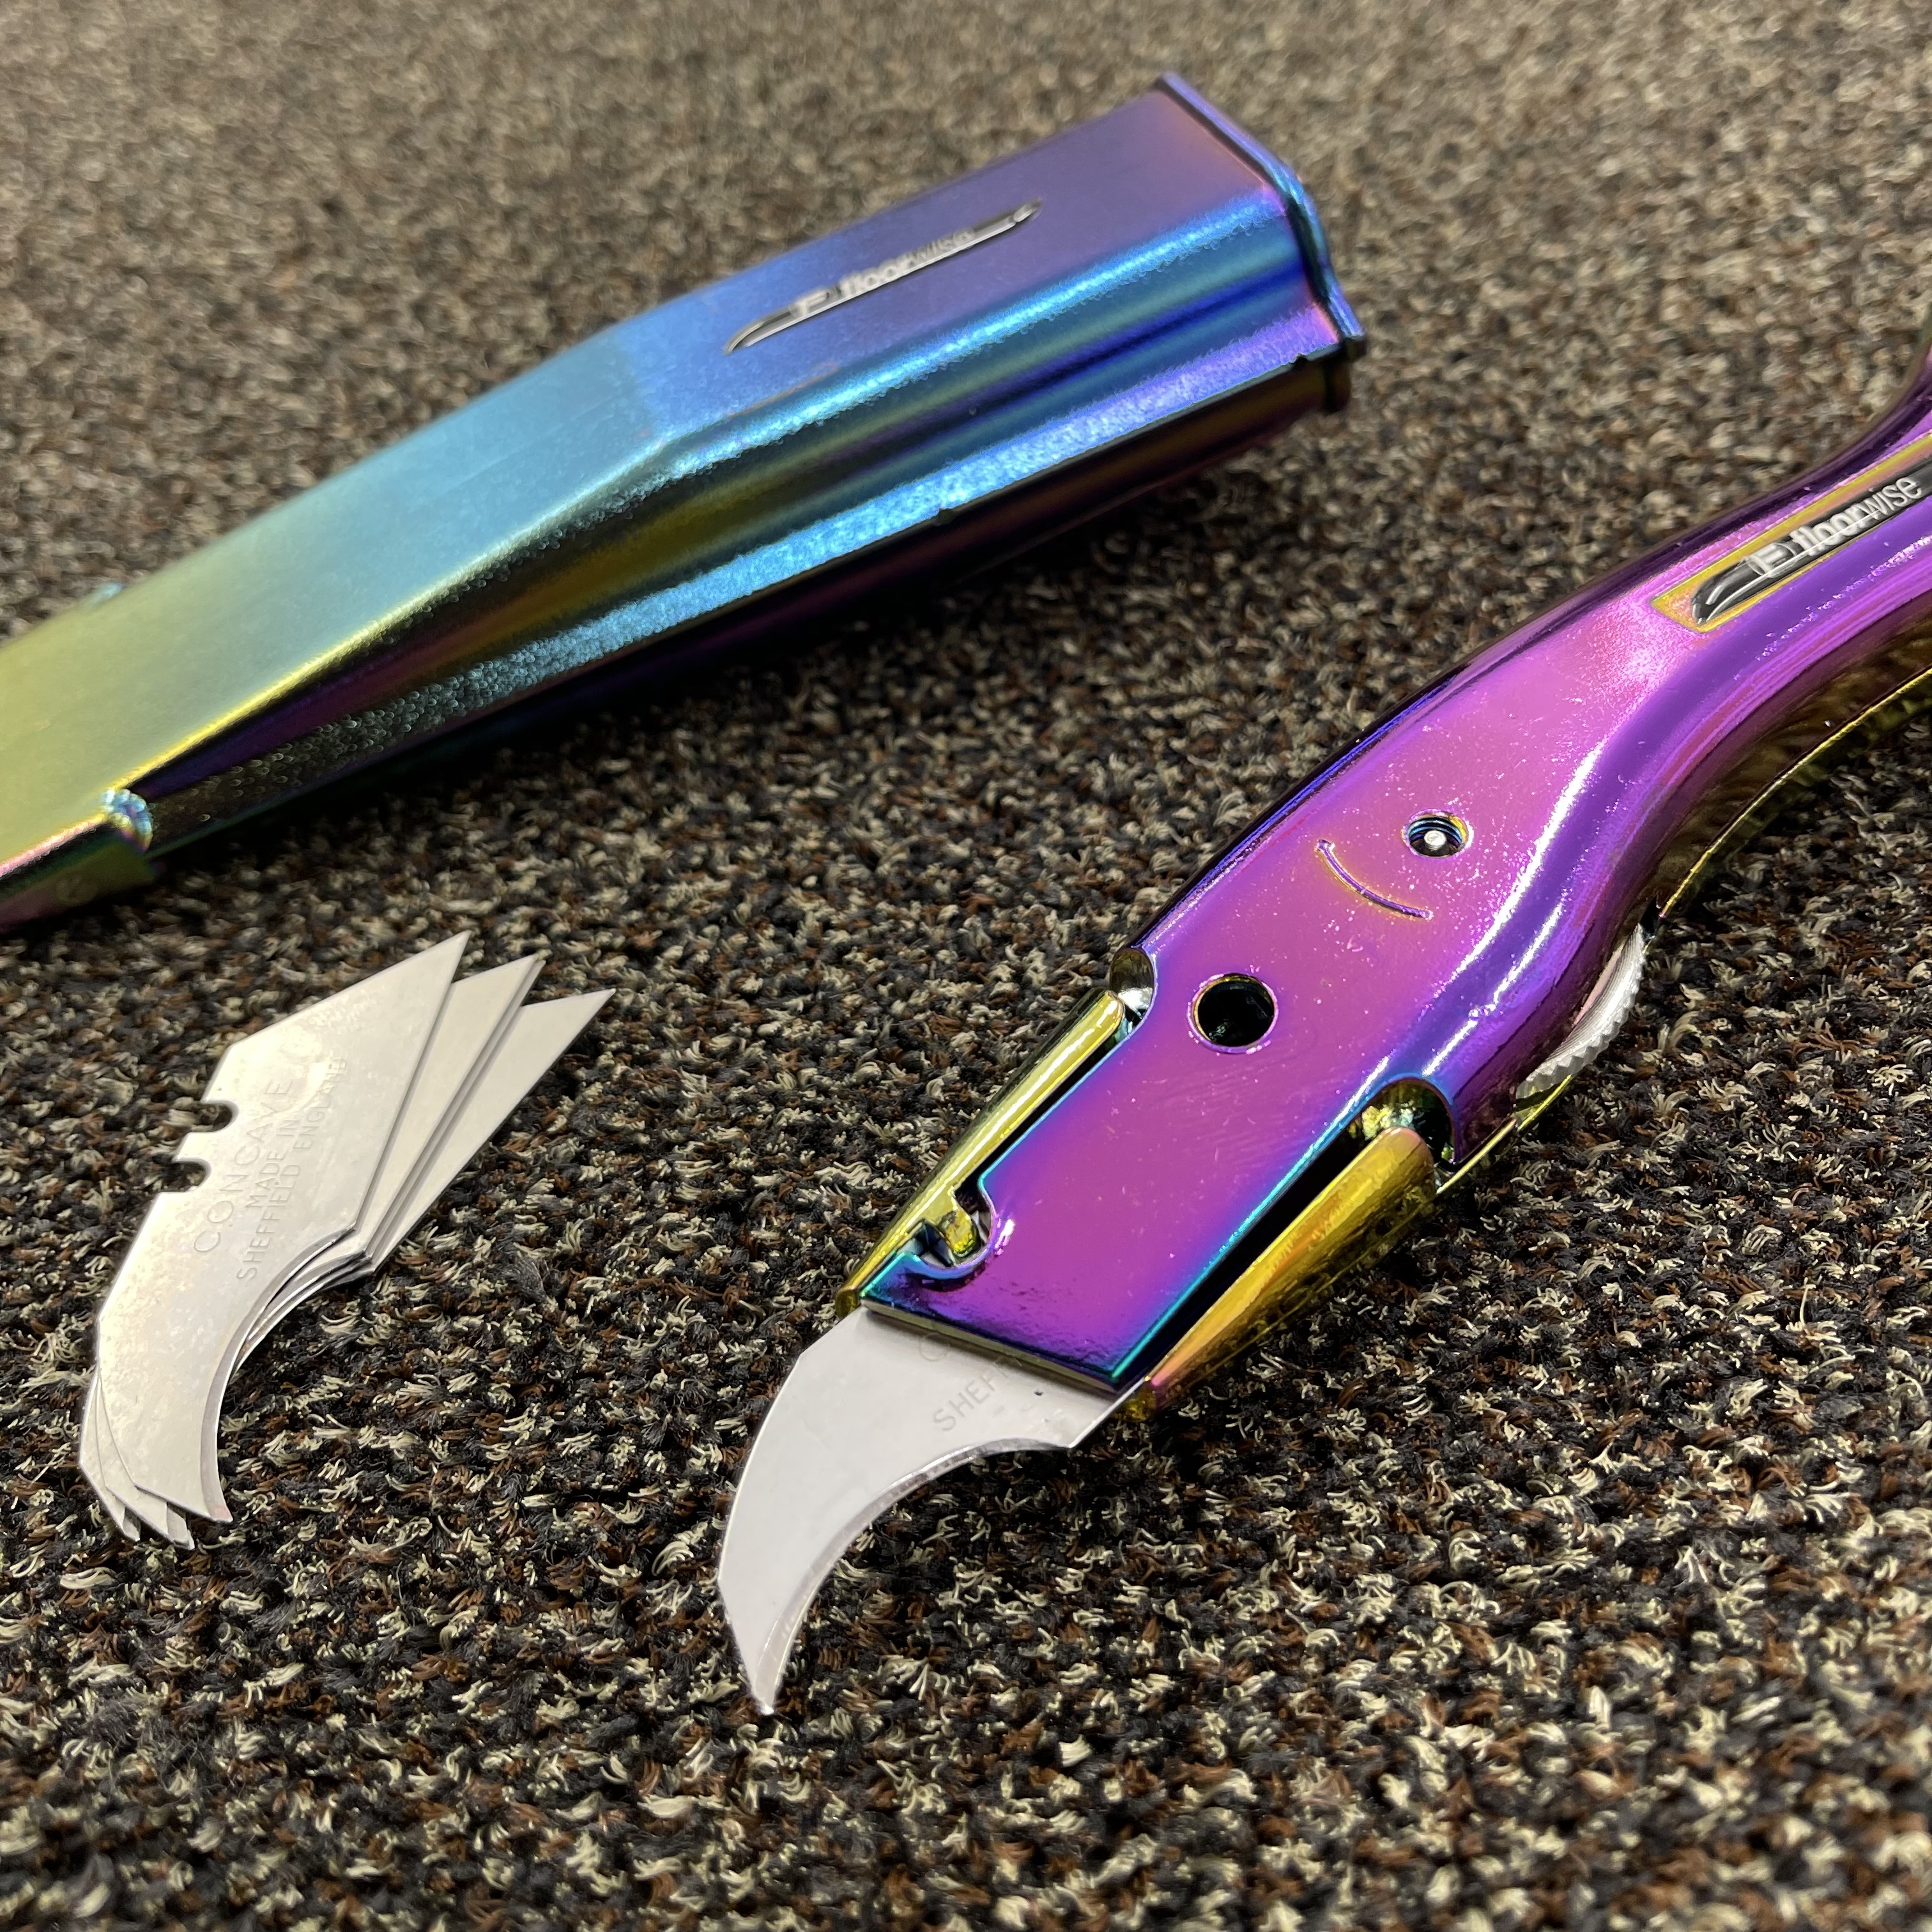 Special Edition Dolphin Knife